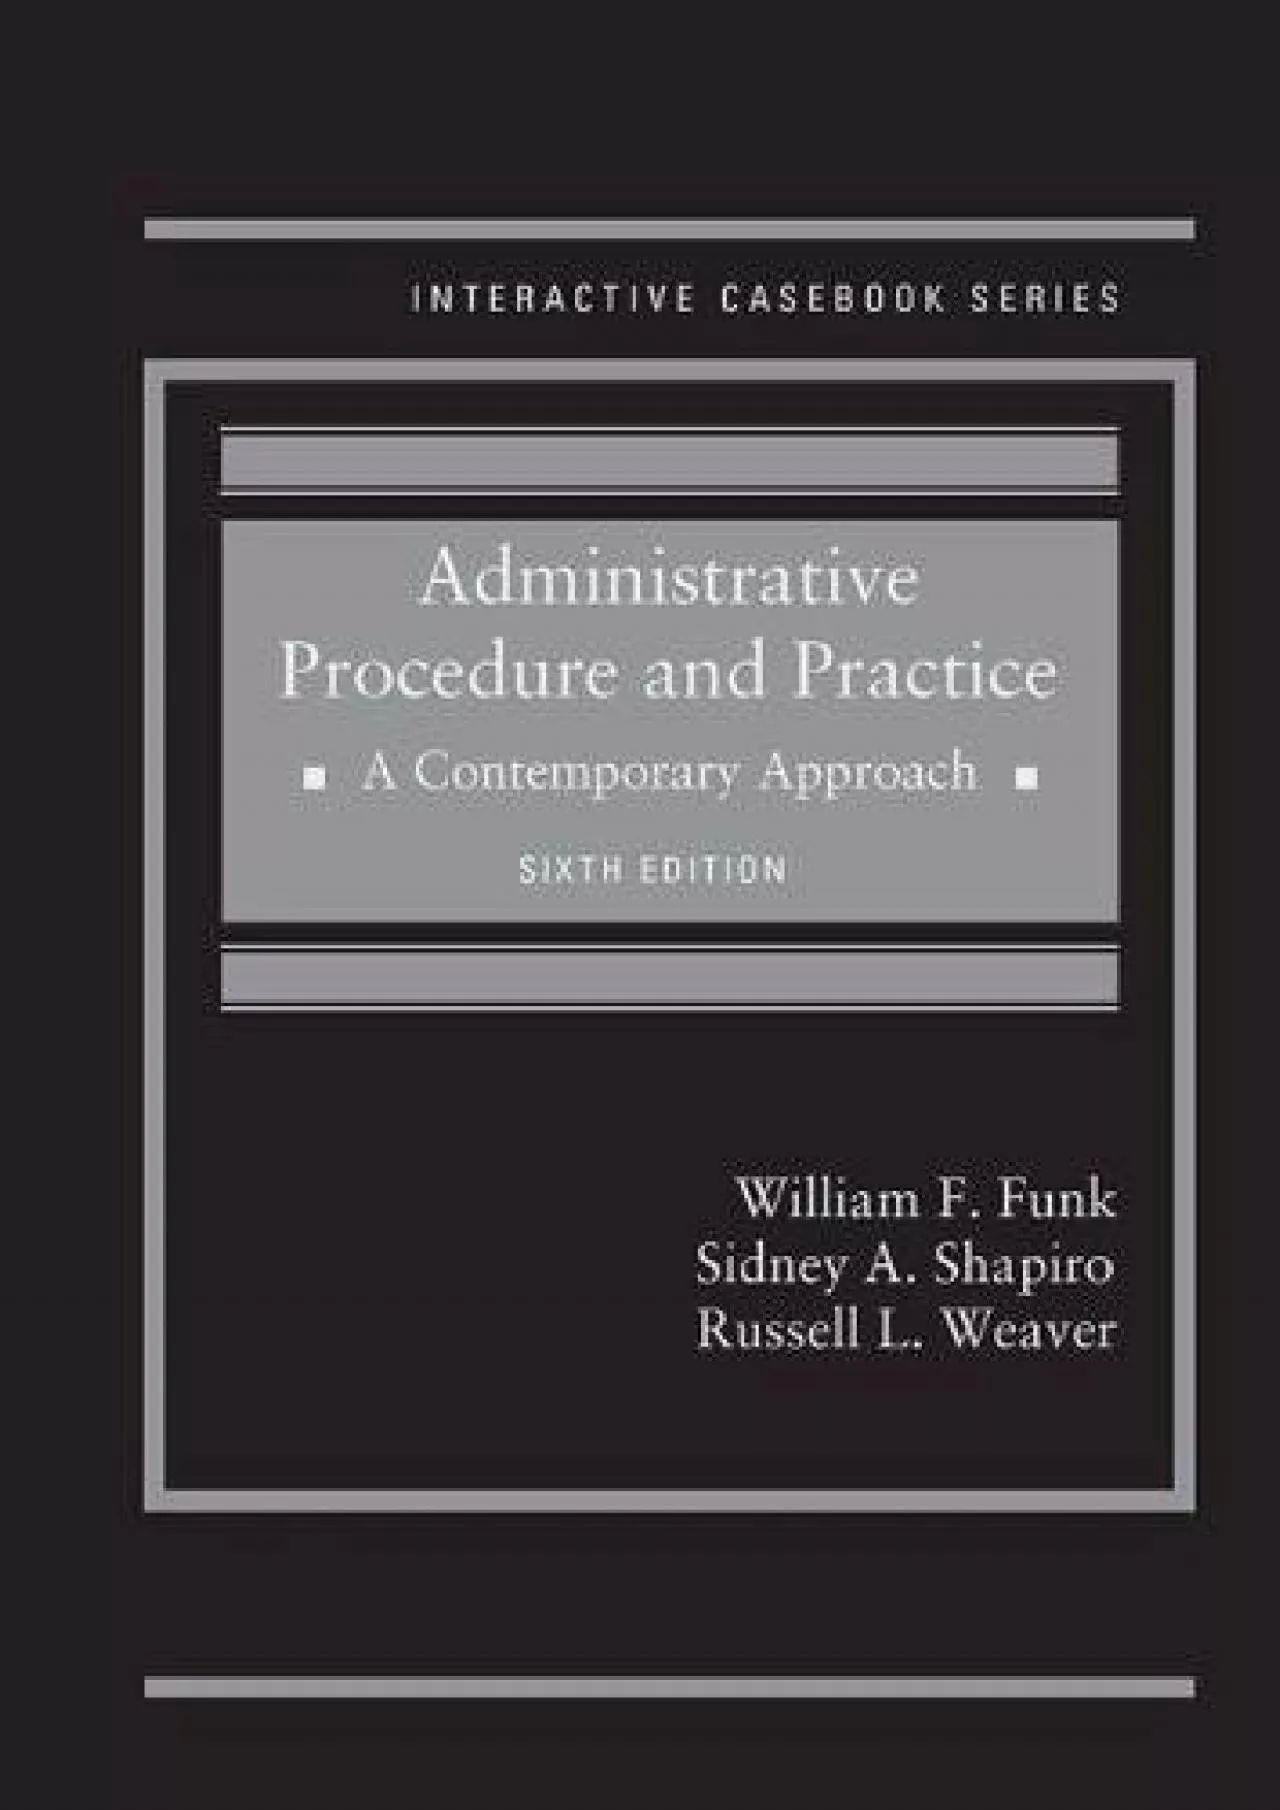 [PDF READ ONLINE] Administrative Procedure and Practice: A Contemporary Approach (Interactive